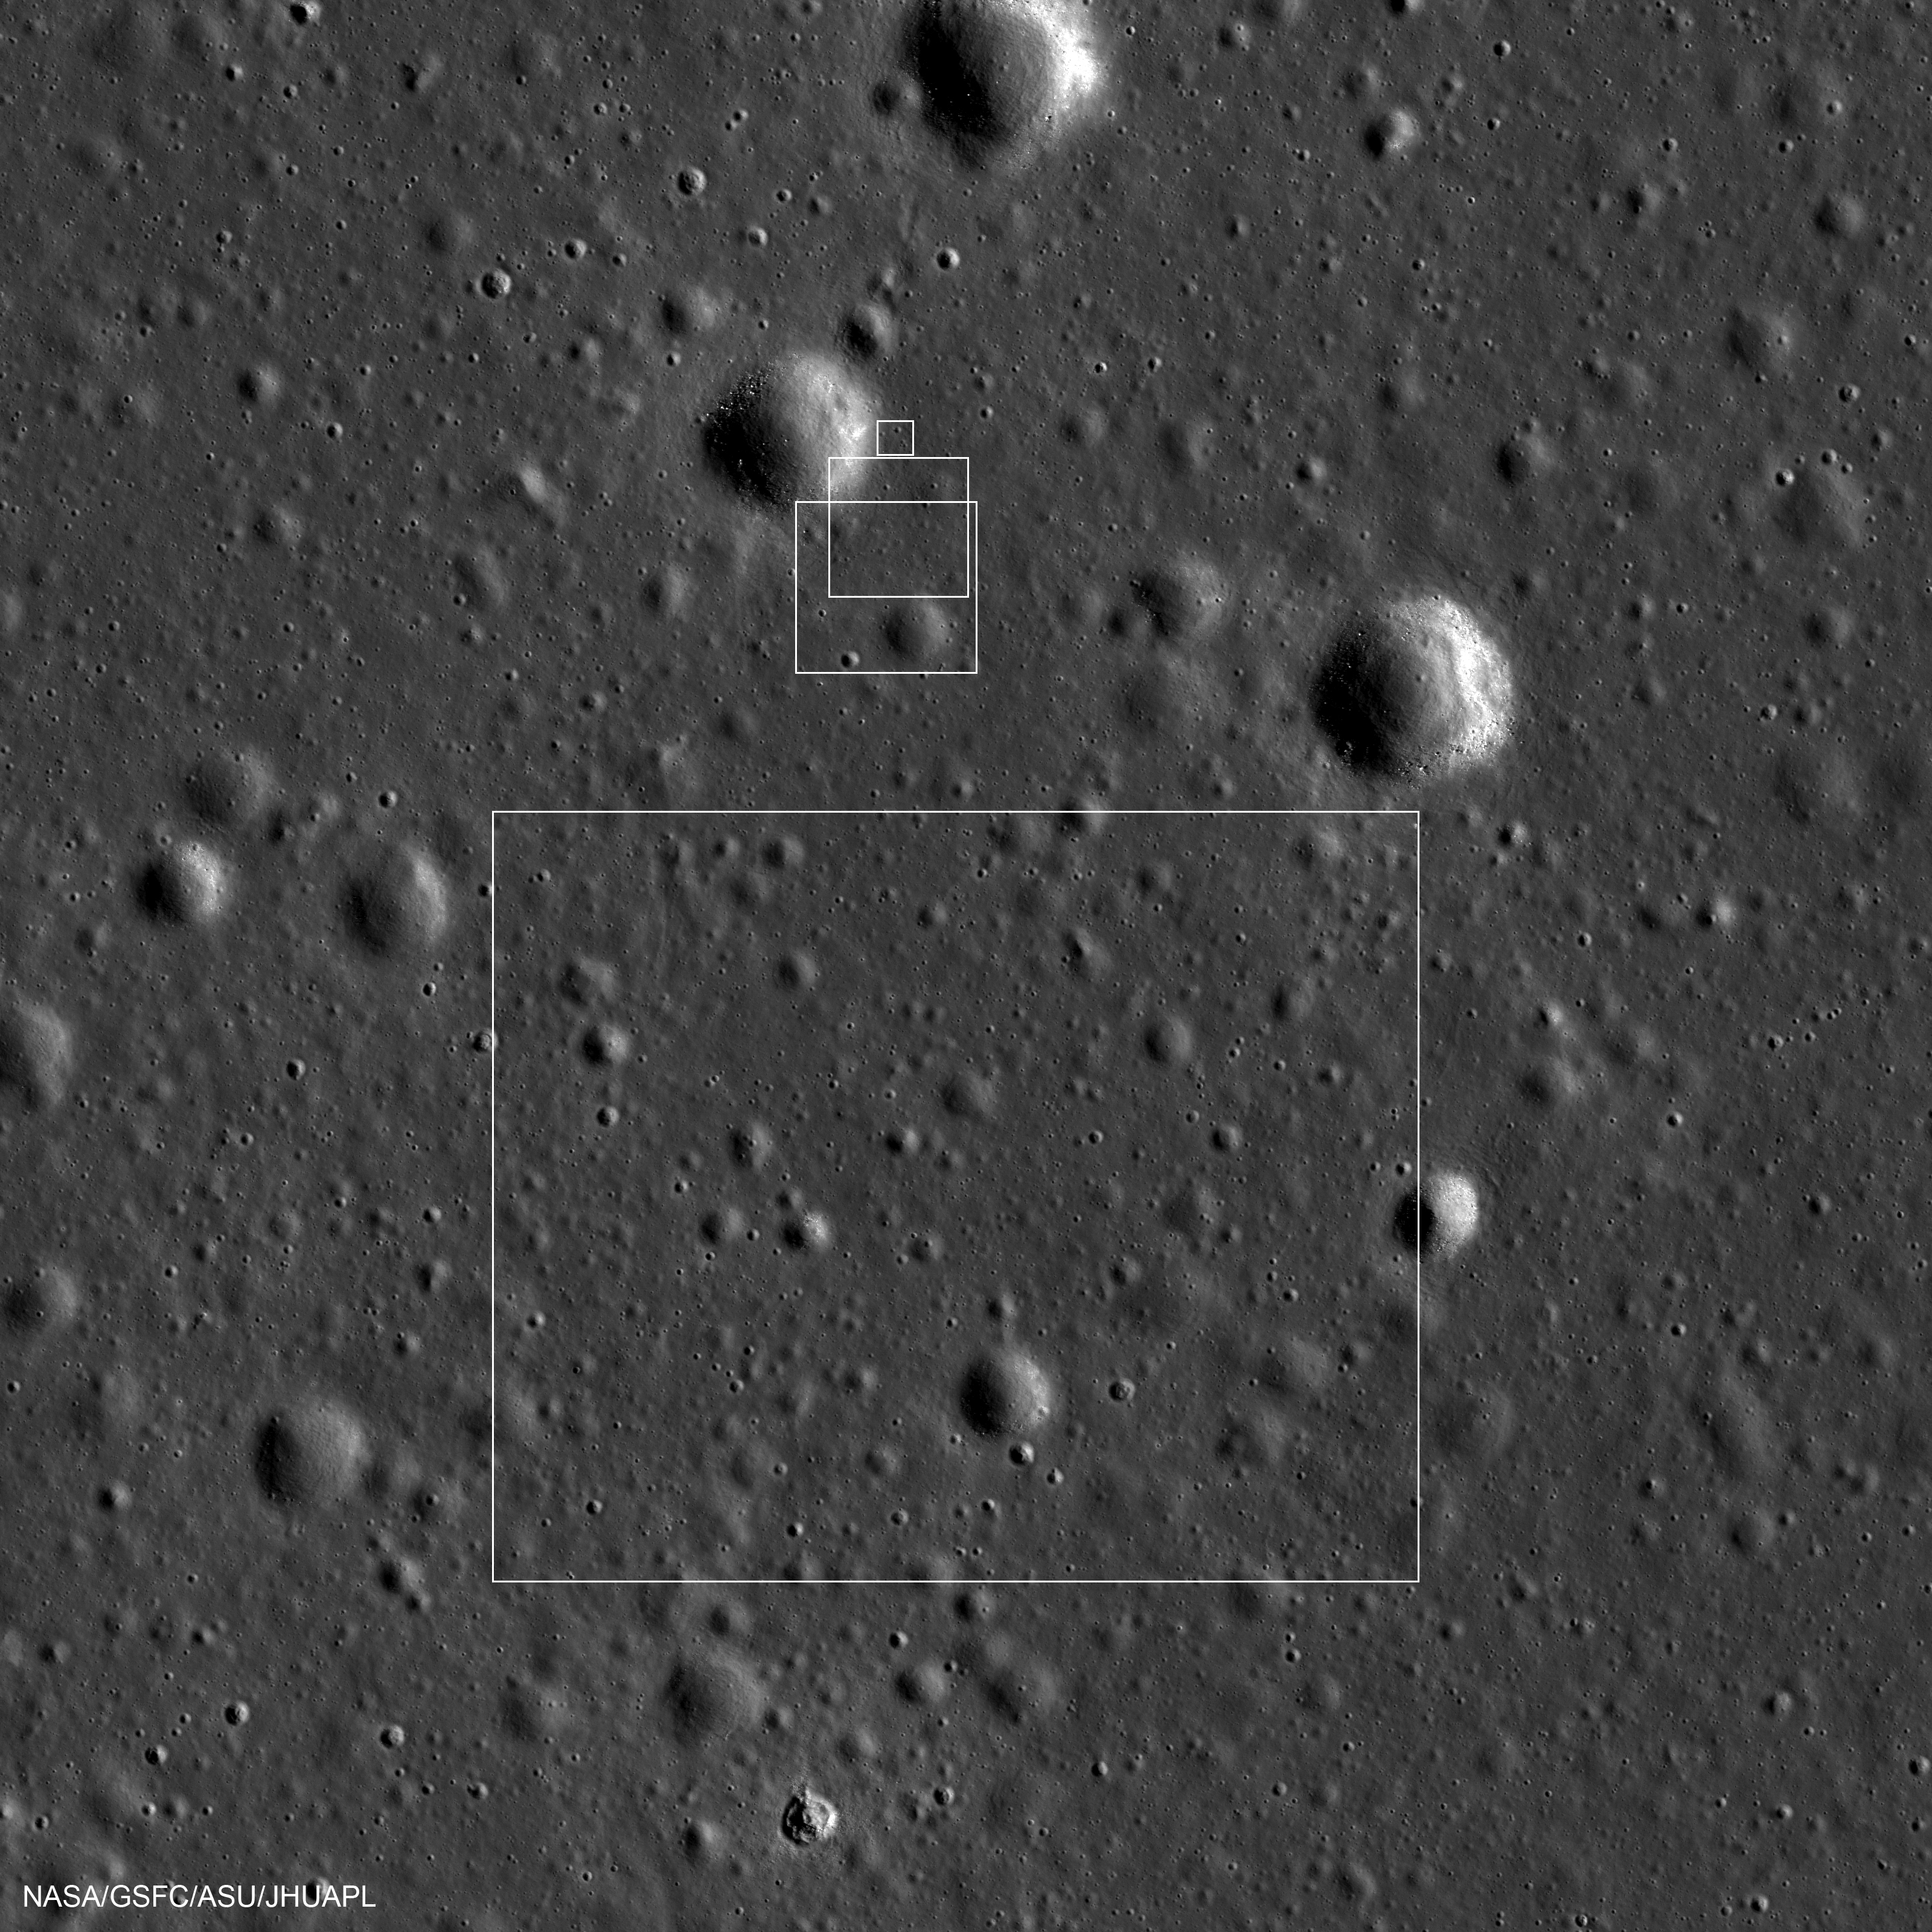 Locations of descent images